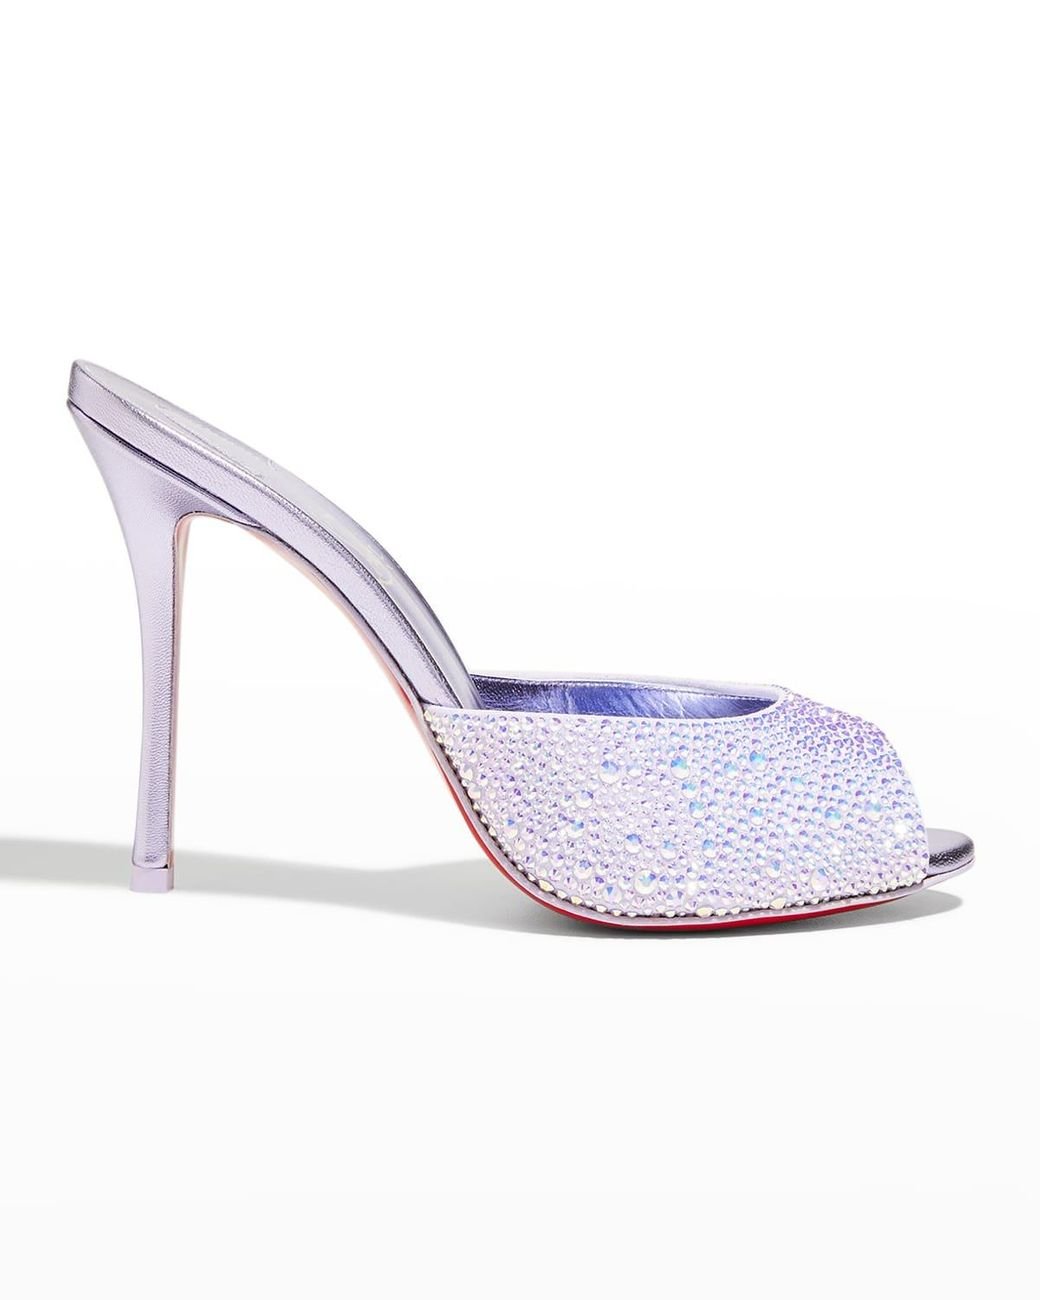 Christian Louboutin Me Dolly Red Sole Mule Sandals